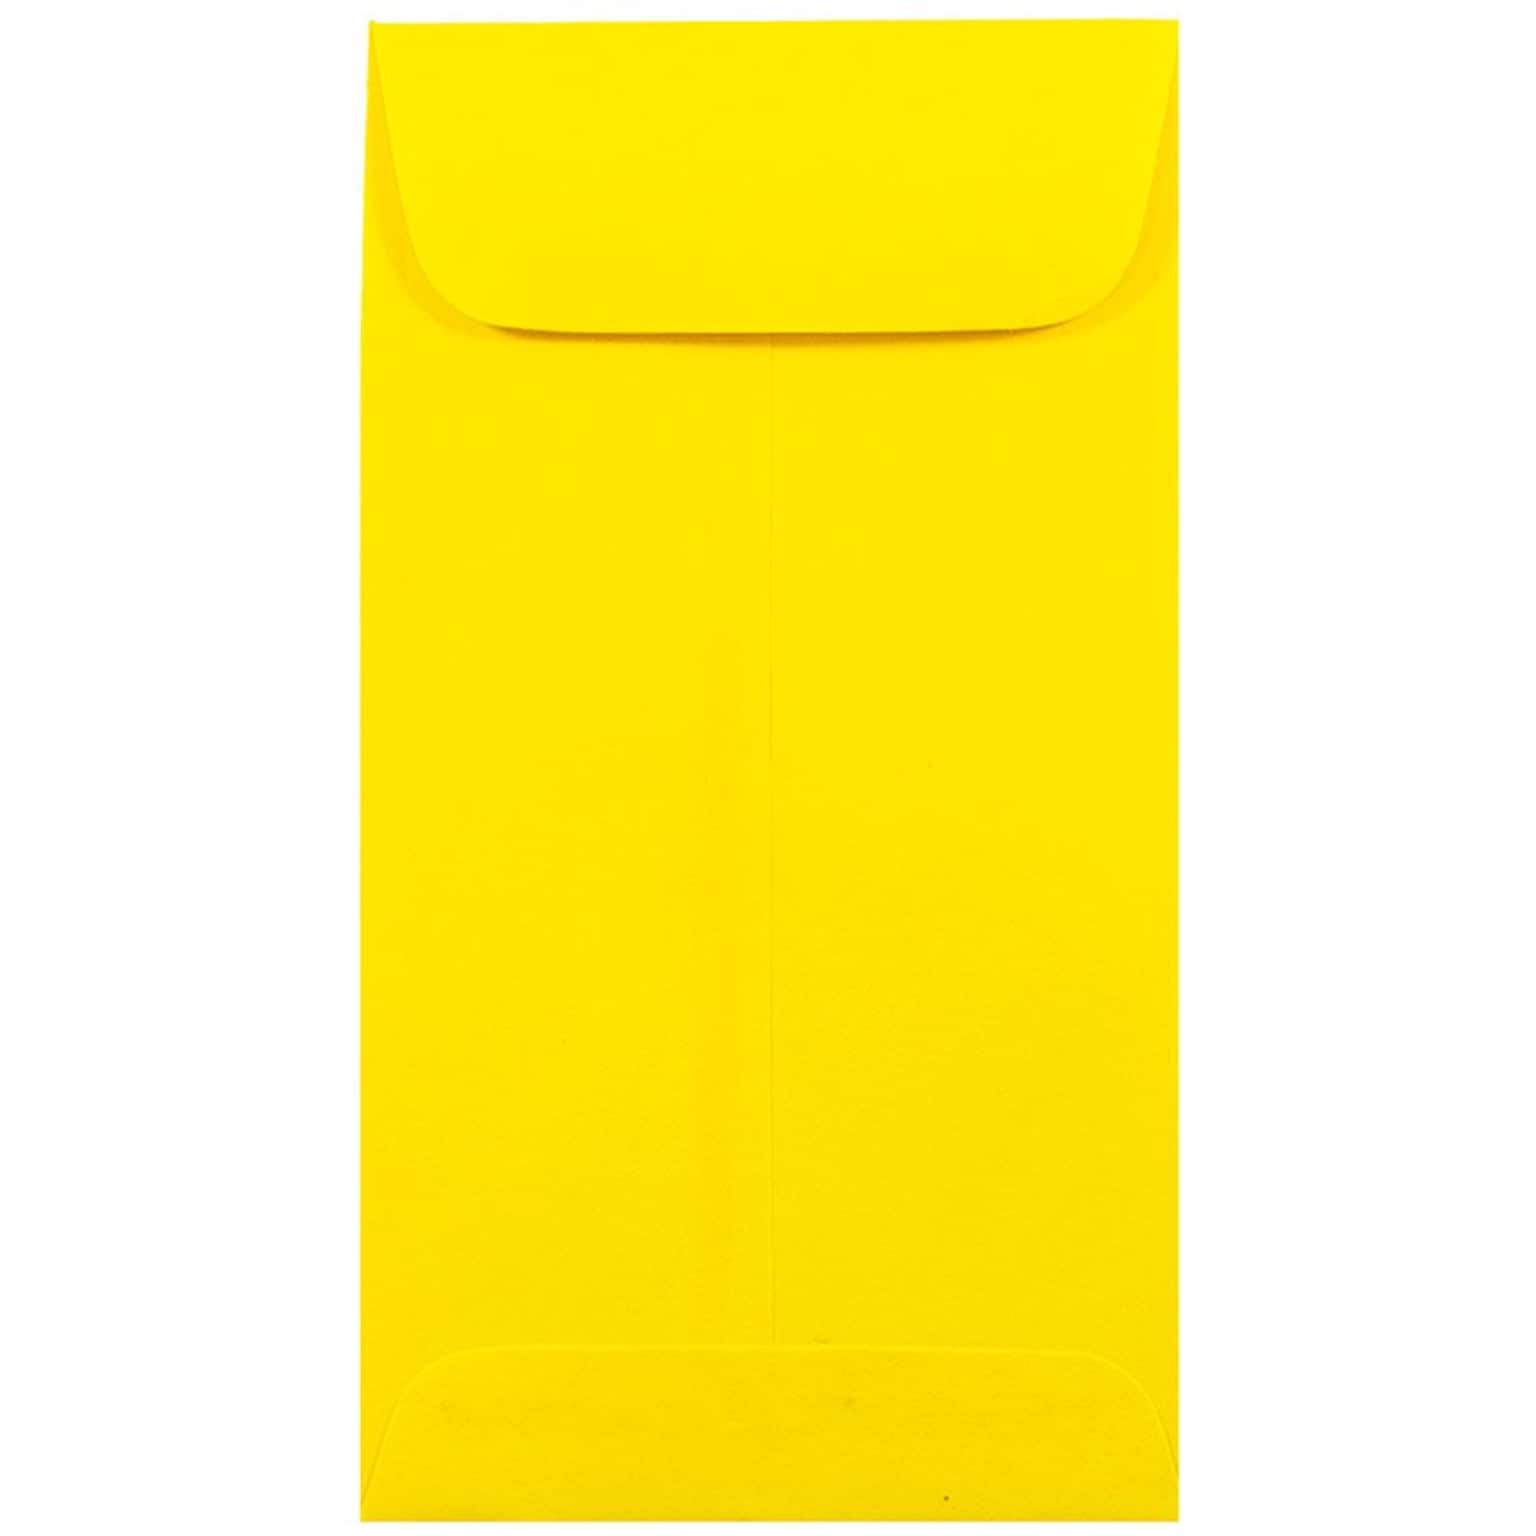 JAM Paper® #7 Coin Business Colored Envelopes, 3.5 x 6.5, Yellow Recycled, Bulk 500/Box (1526761H)